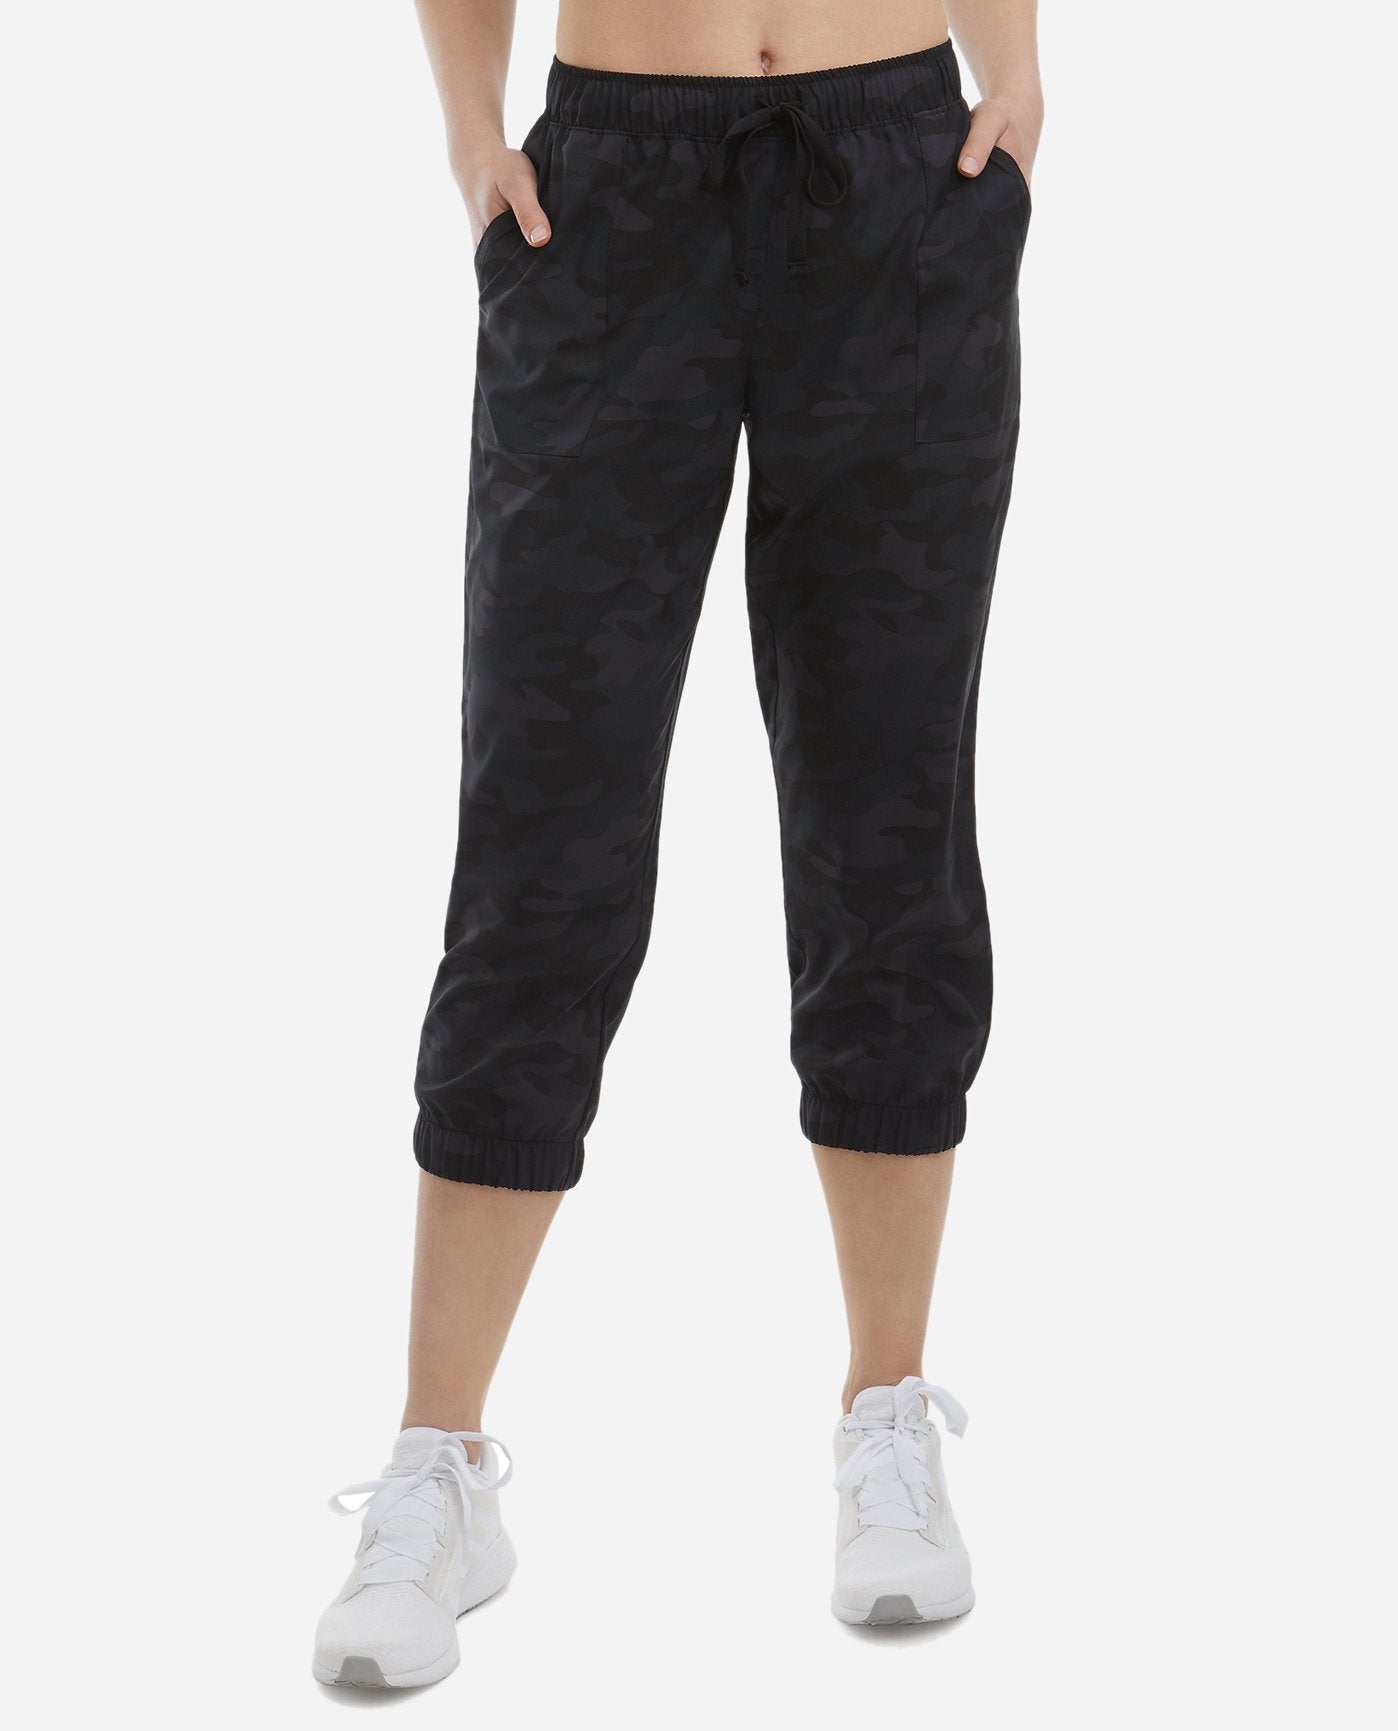 Woven Joggers for Women in Black